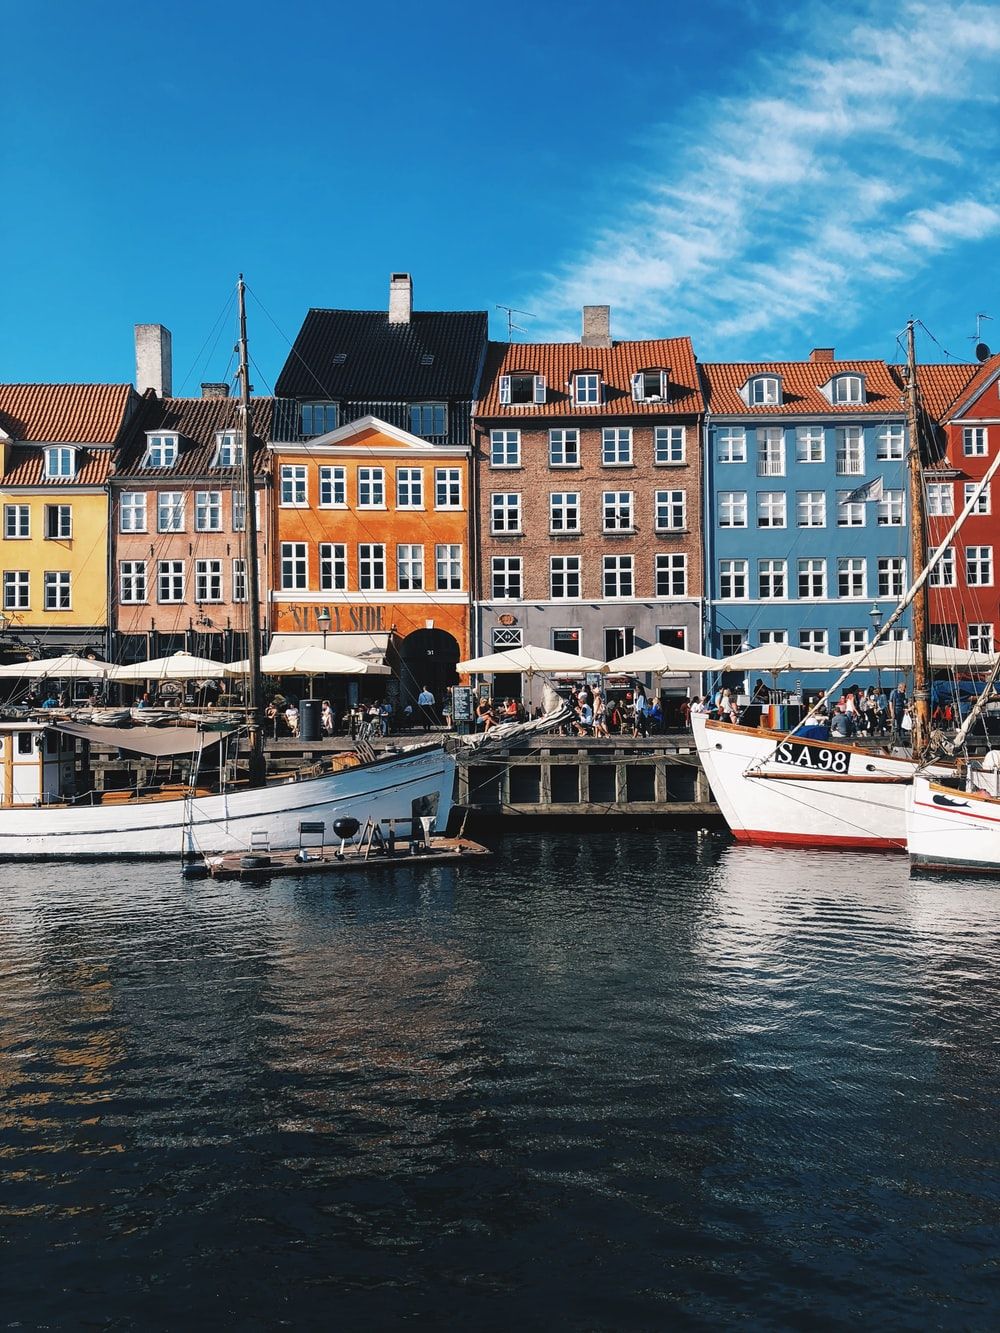 Stunning Denmark Picture [Scenic Travel Photo]. Download